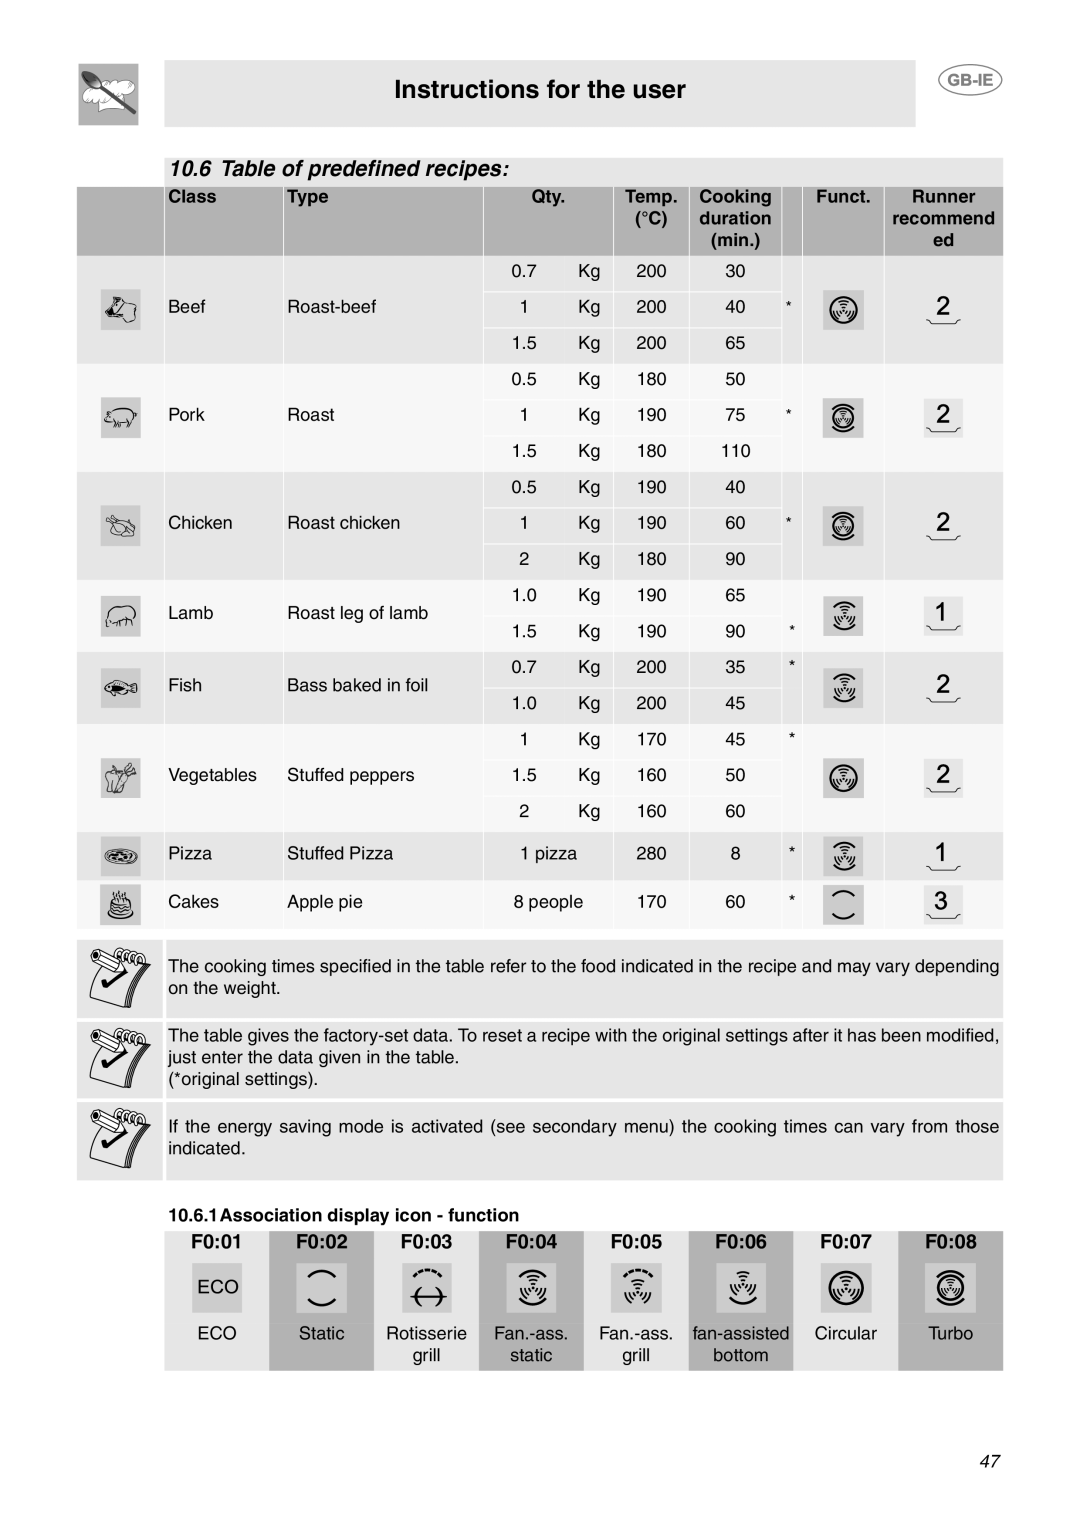 Smeg CE92GPX Table of predefined recipes, Instructions for the user, F001, F002, F003, F004, F005, F006, F007, F008, Class 